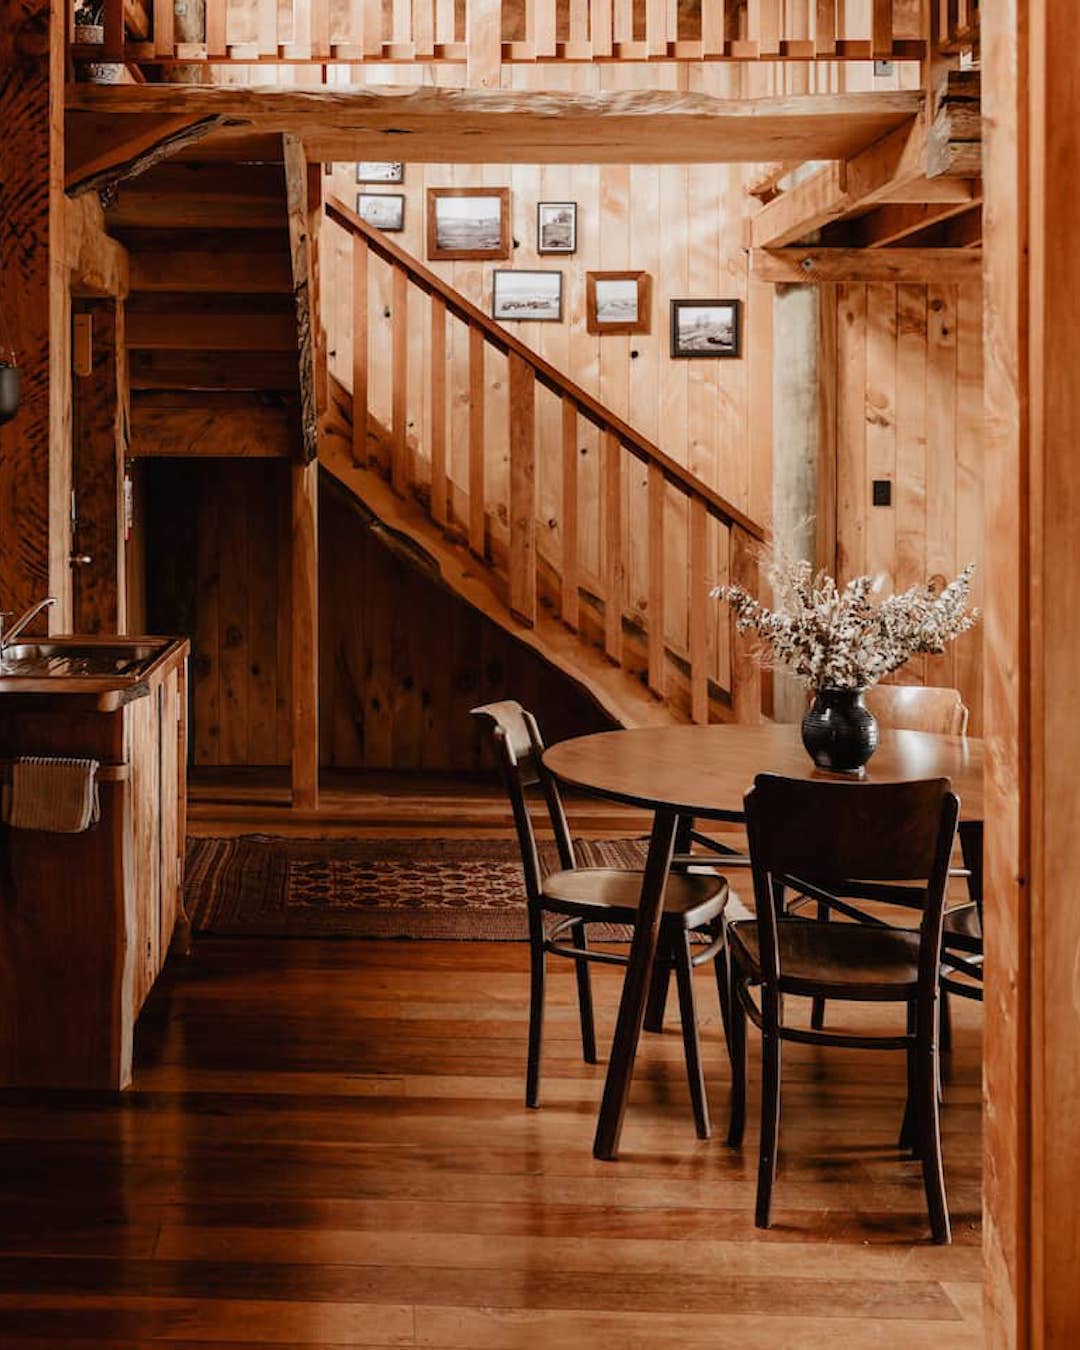 A wood-panelled cabin interior with rustic decor